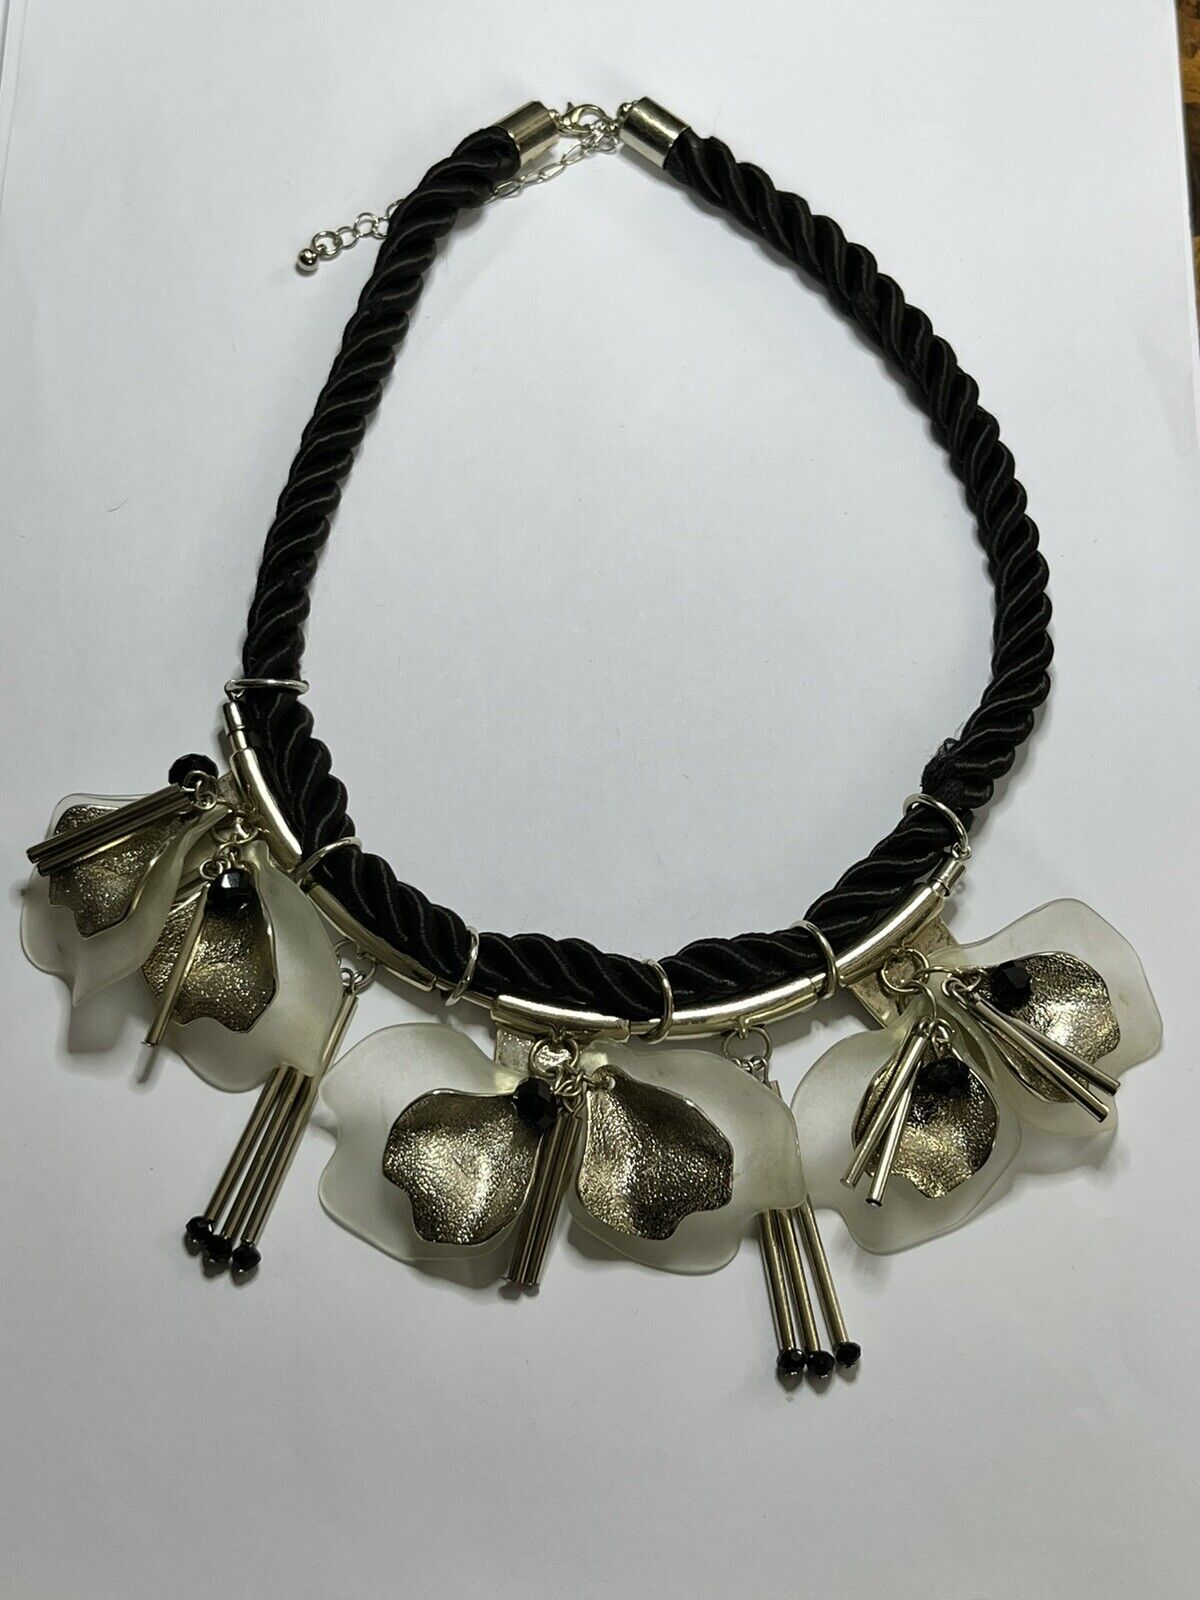 Vintage Glass Flowers Silver Tone Metal Beaded Rope Necklace